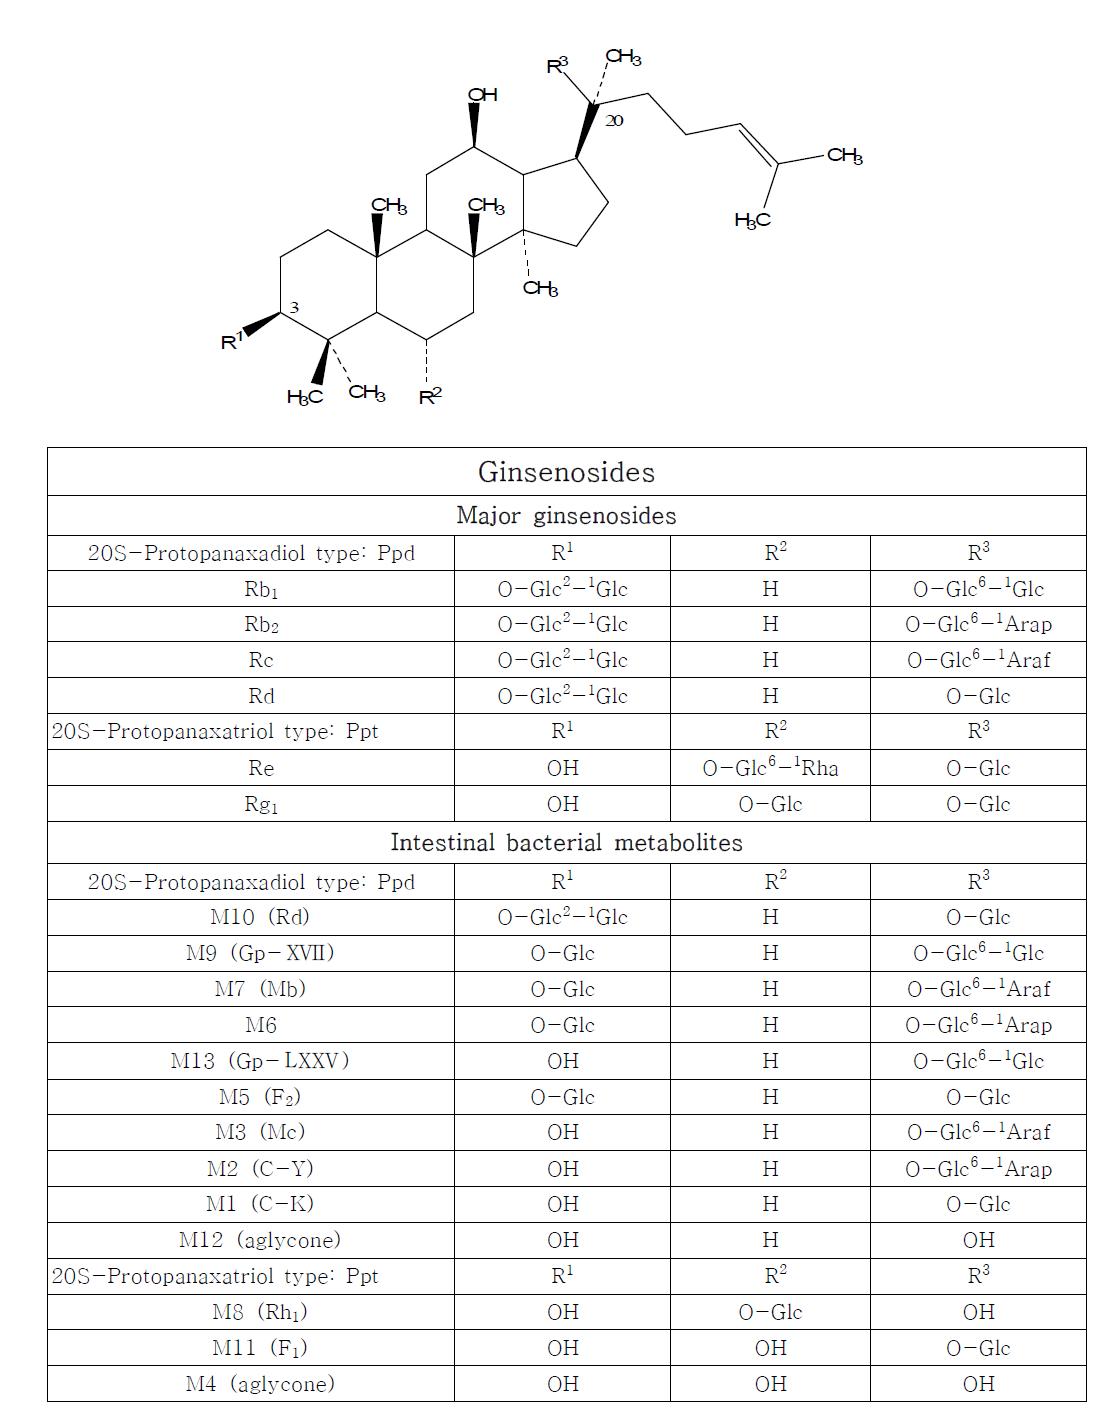 Chemical structures of ginsenosides and their metabolites formed by intestinal bacteria.